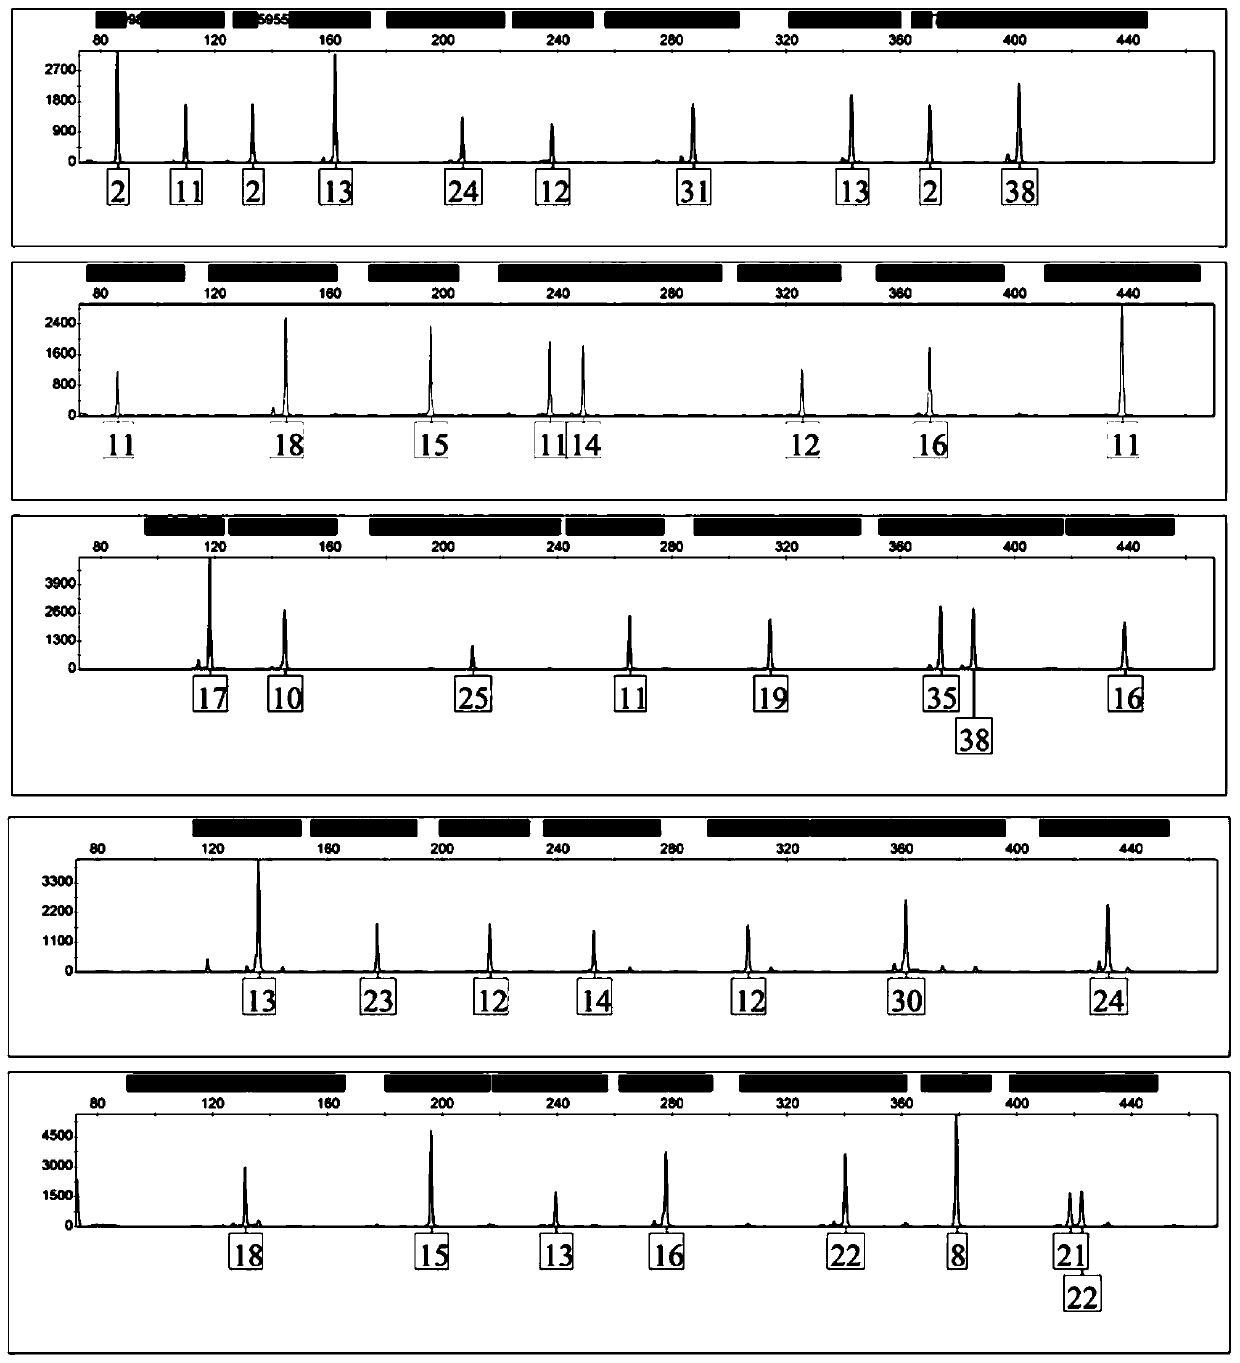 Y-STR gene locus and Y-indel gene locus based compound amplification system and primer combinations used by the same